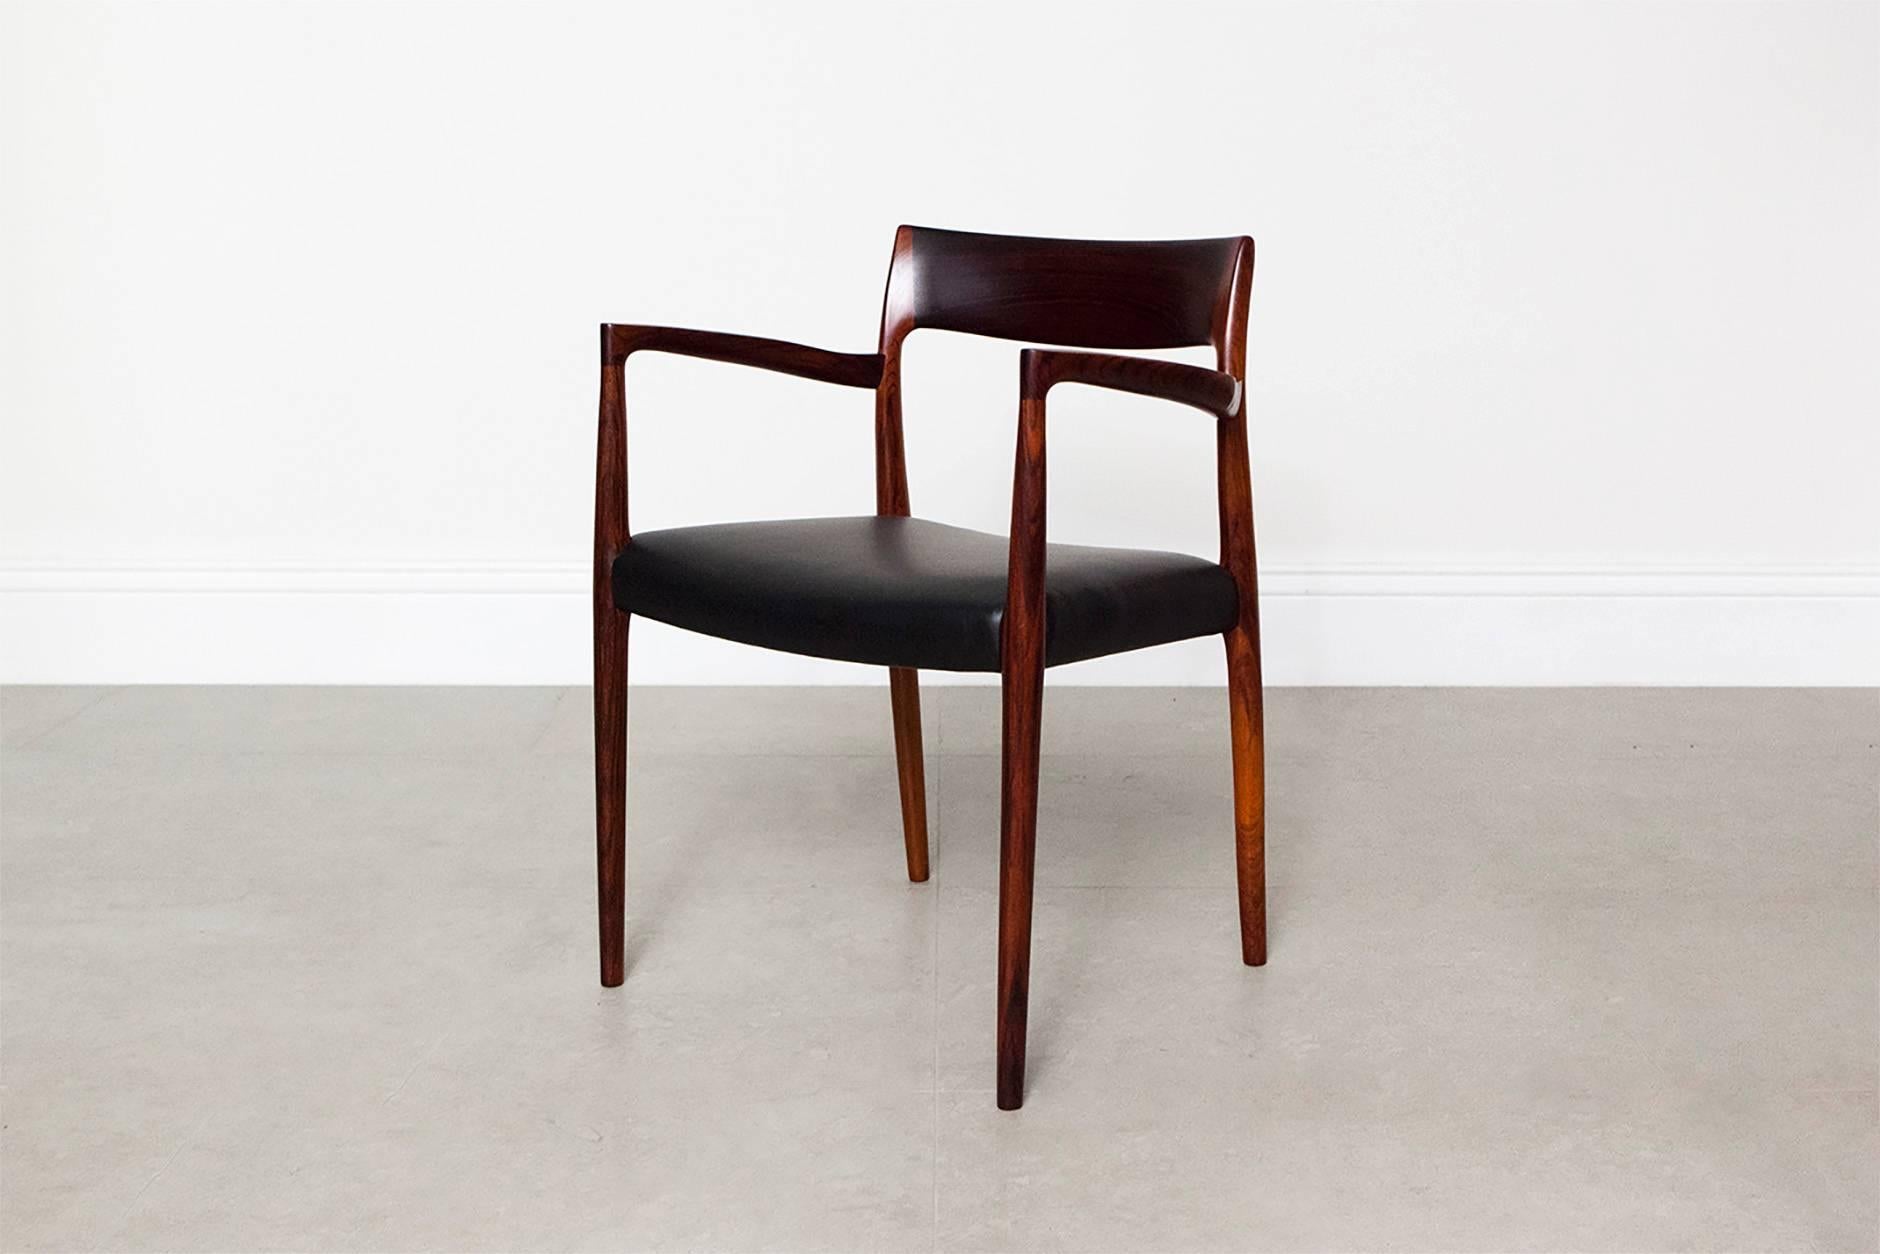 Model 57 chair from Danish designer Niels Moller for J.L Moller Mobelfabrik, 1959. The seat has been reupholstered with new black leather. 